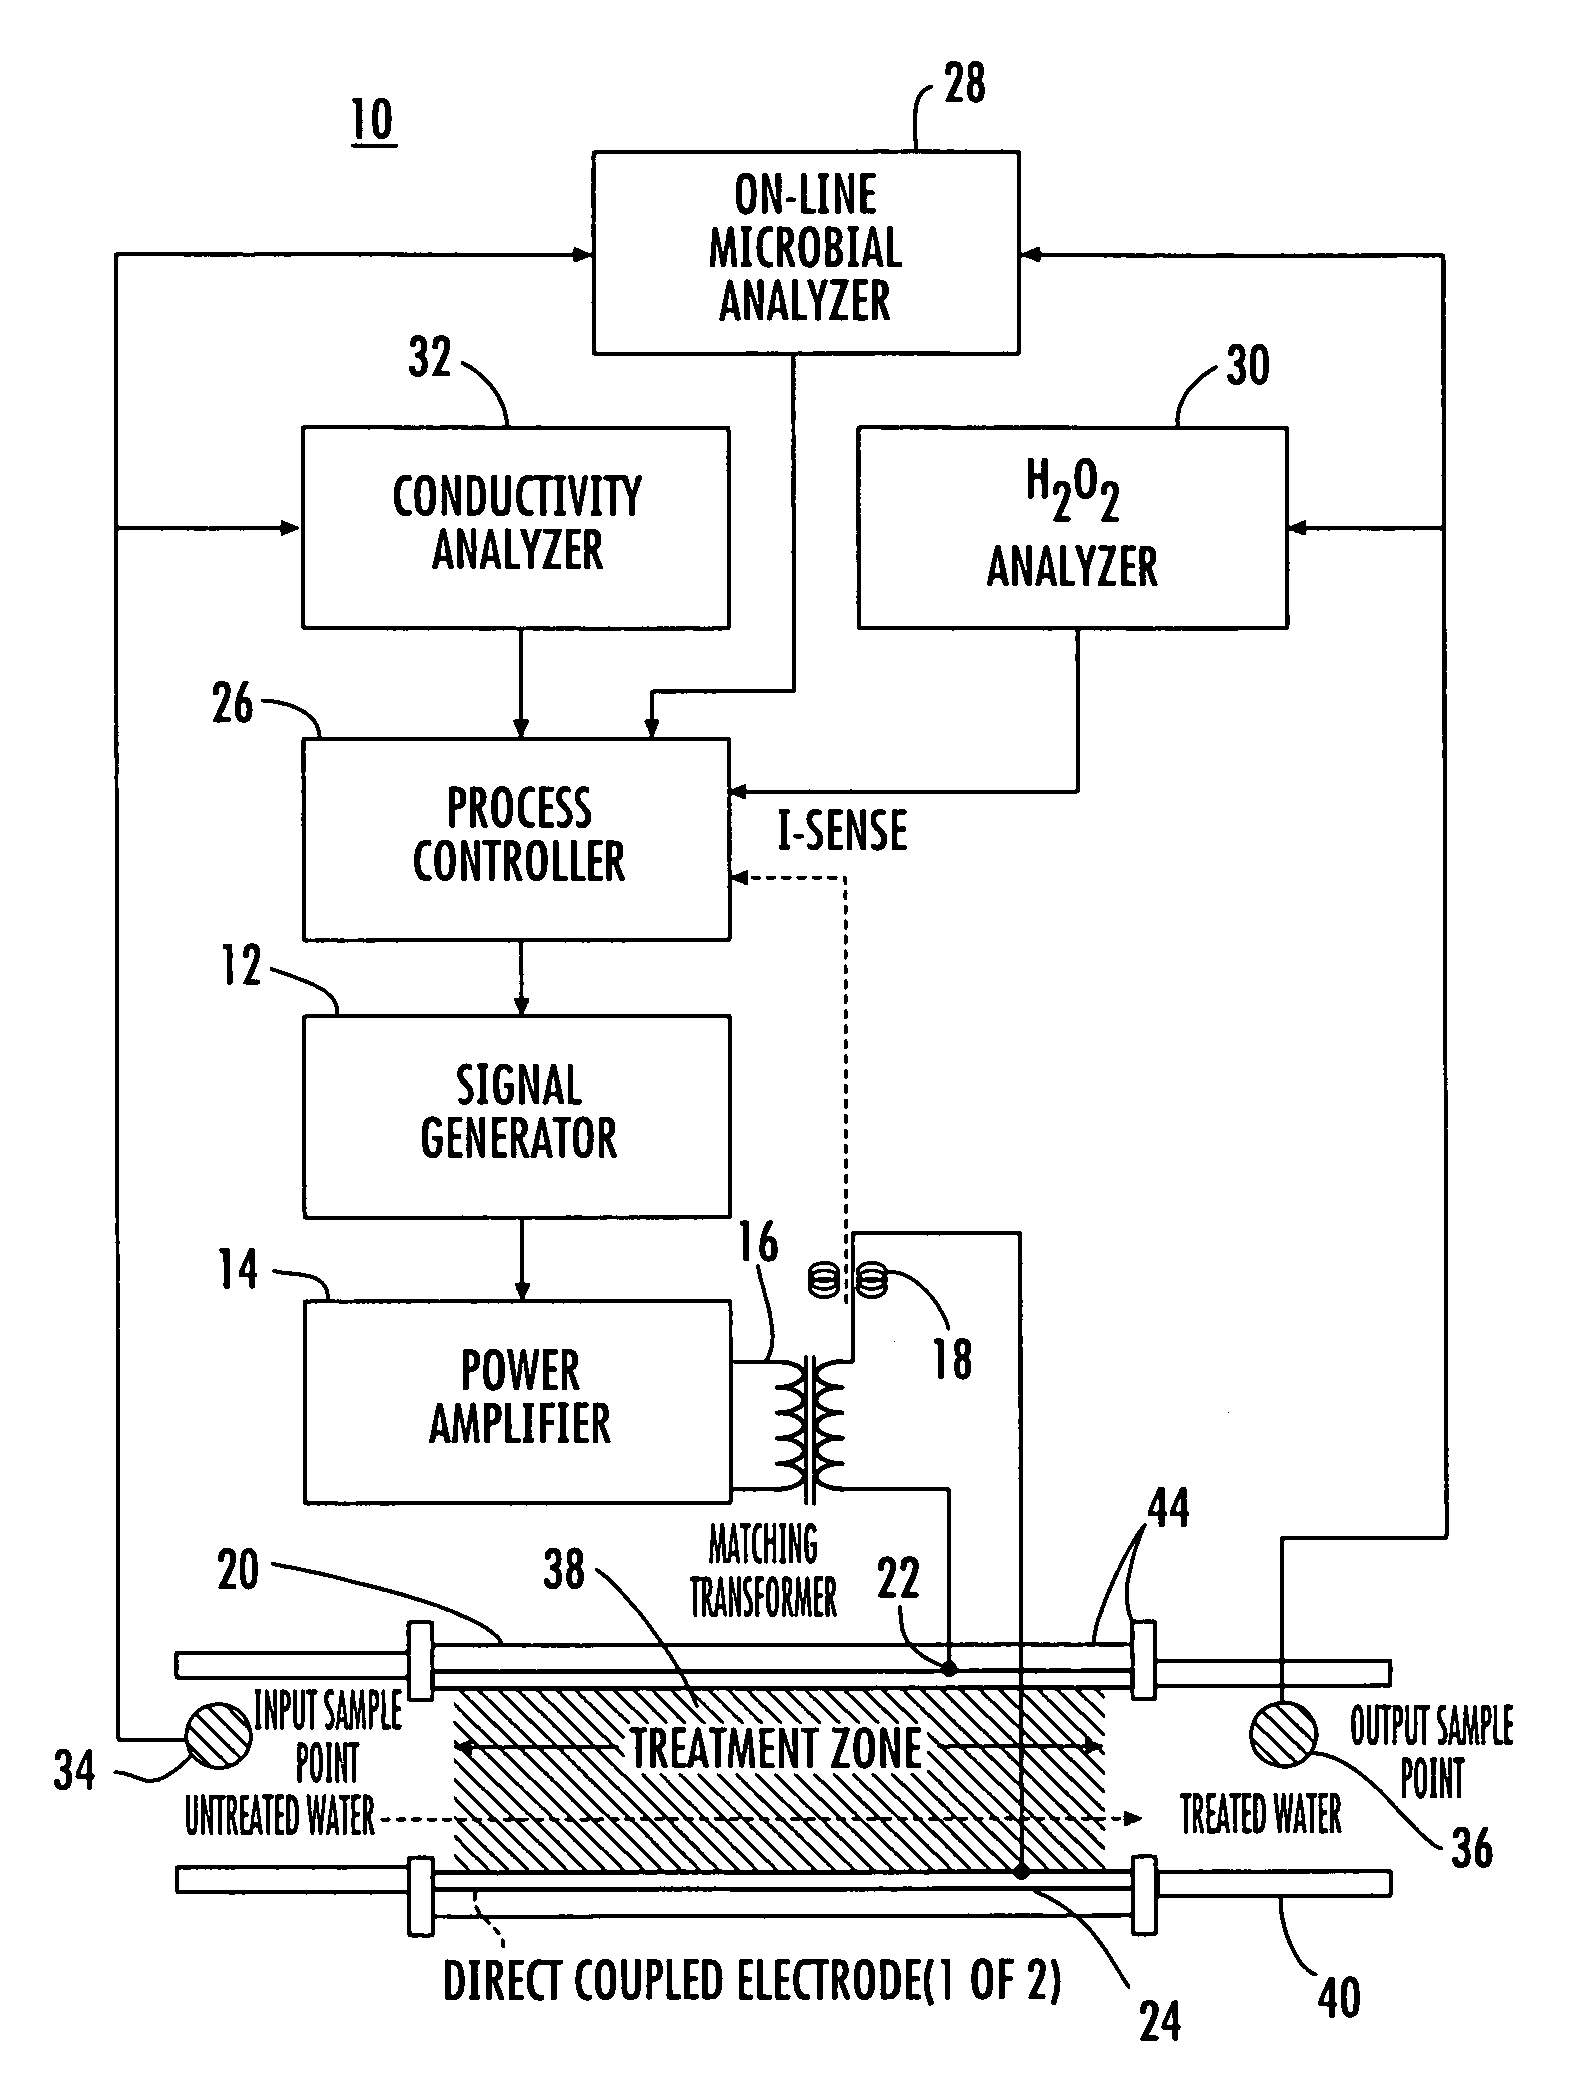 Electroionic processing system